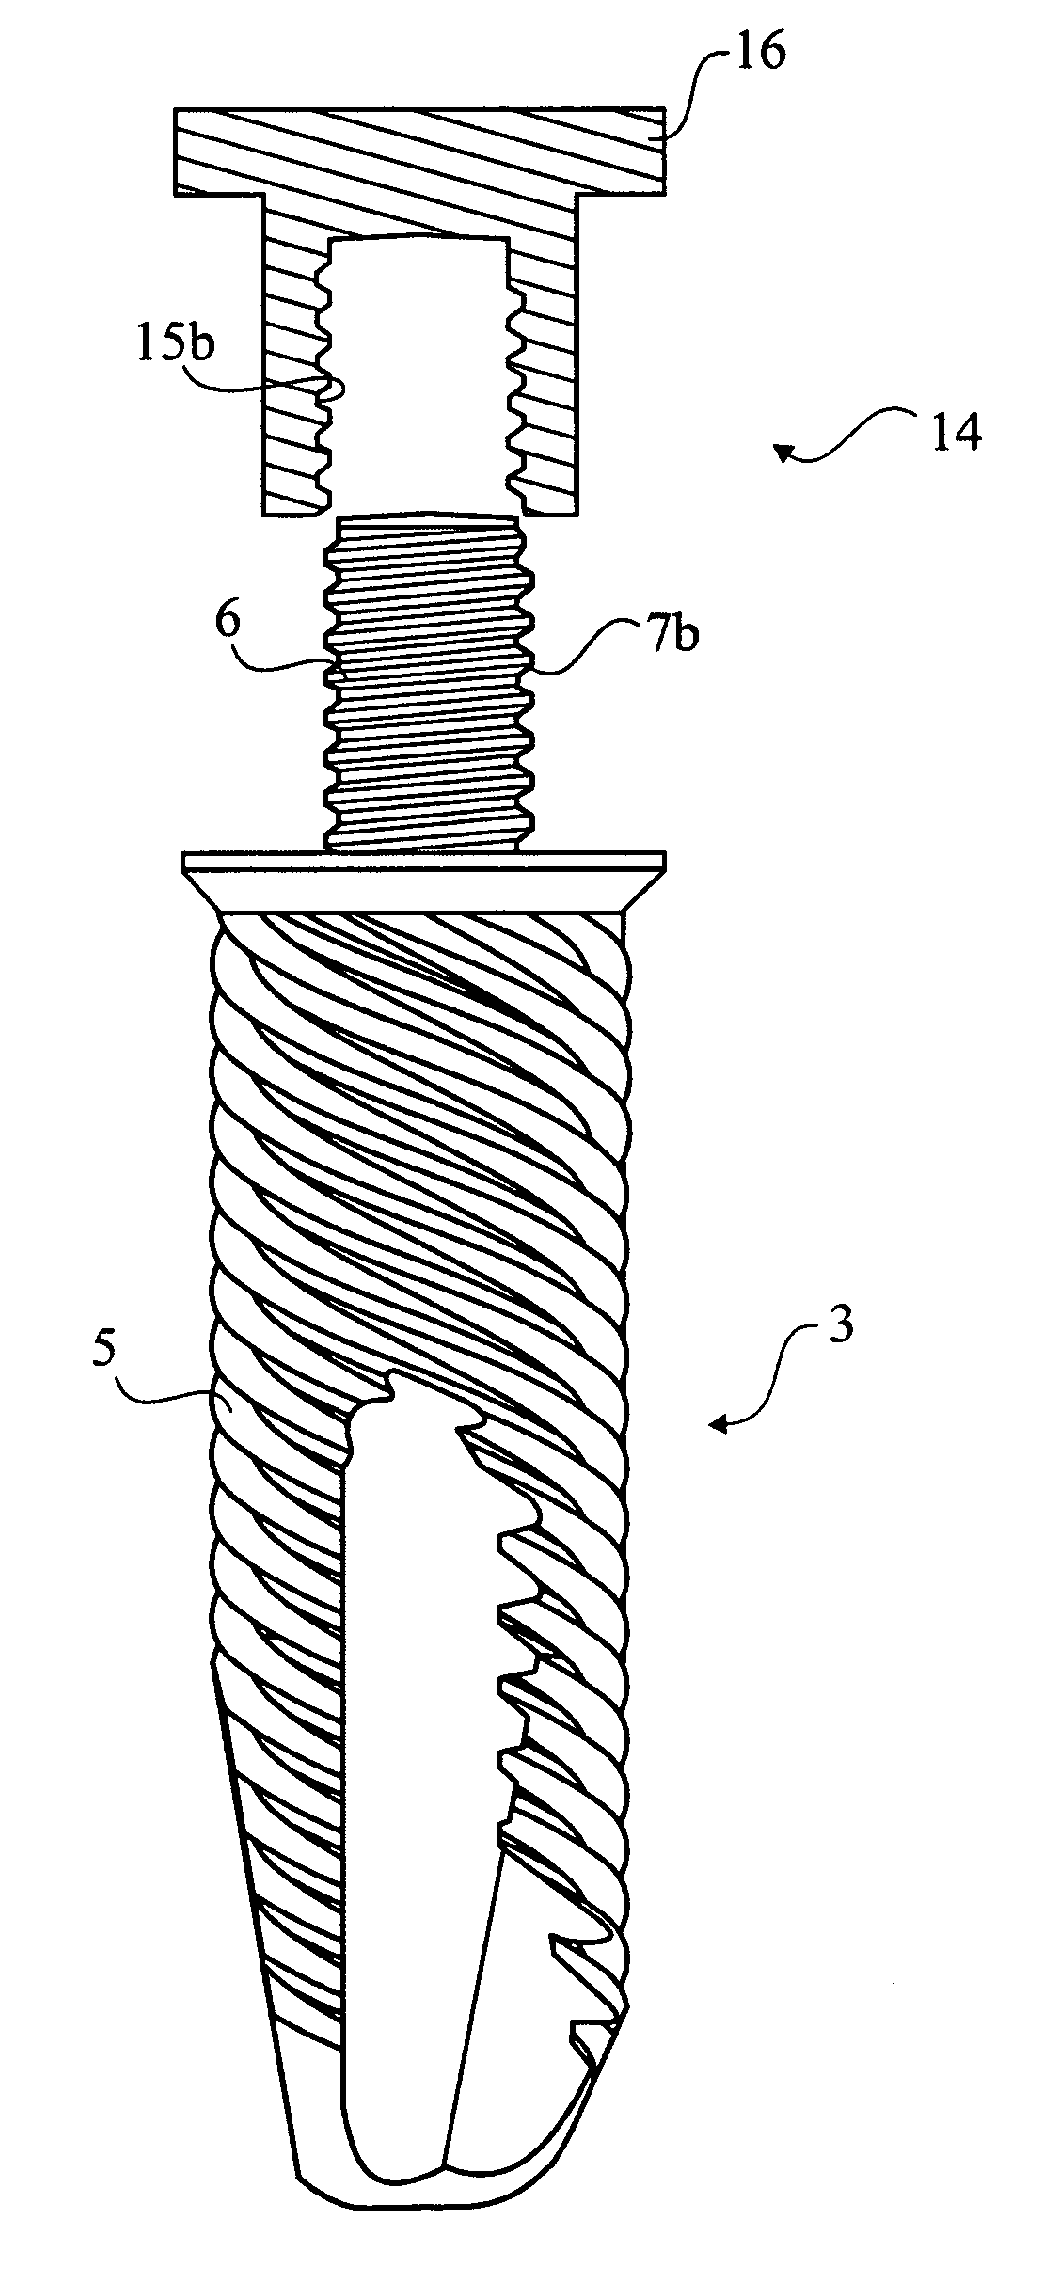 Dental implant, a dental implant kit and a method of securing a dental bridge to the jaw of the patient